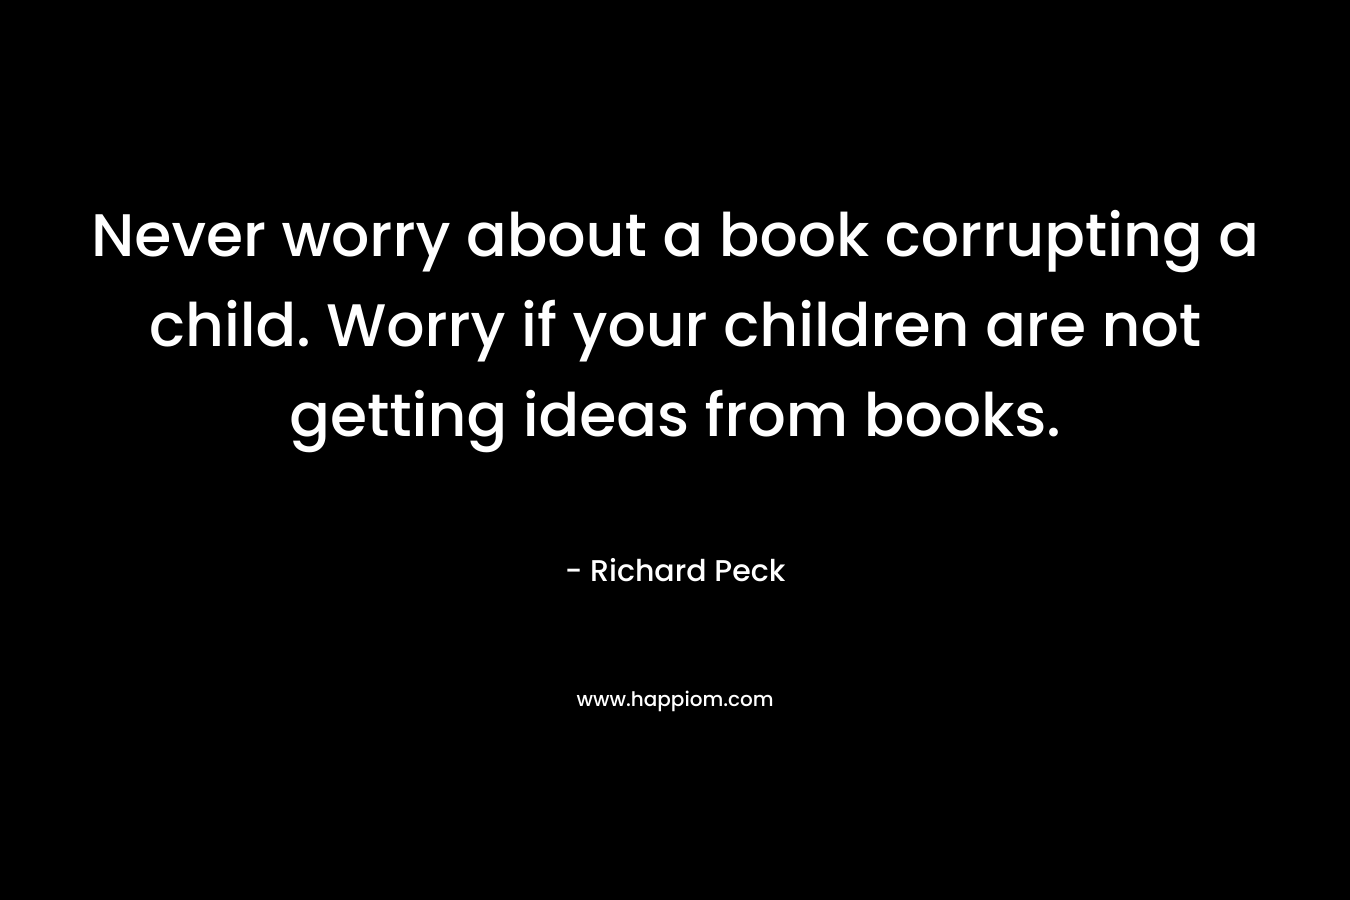 Never worry about a book corrupting a child. Worry if your children are not getting ideas from books.